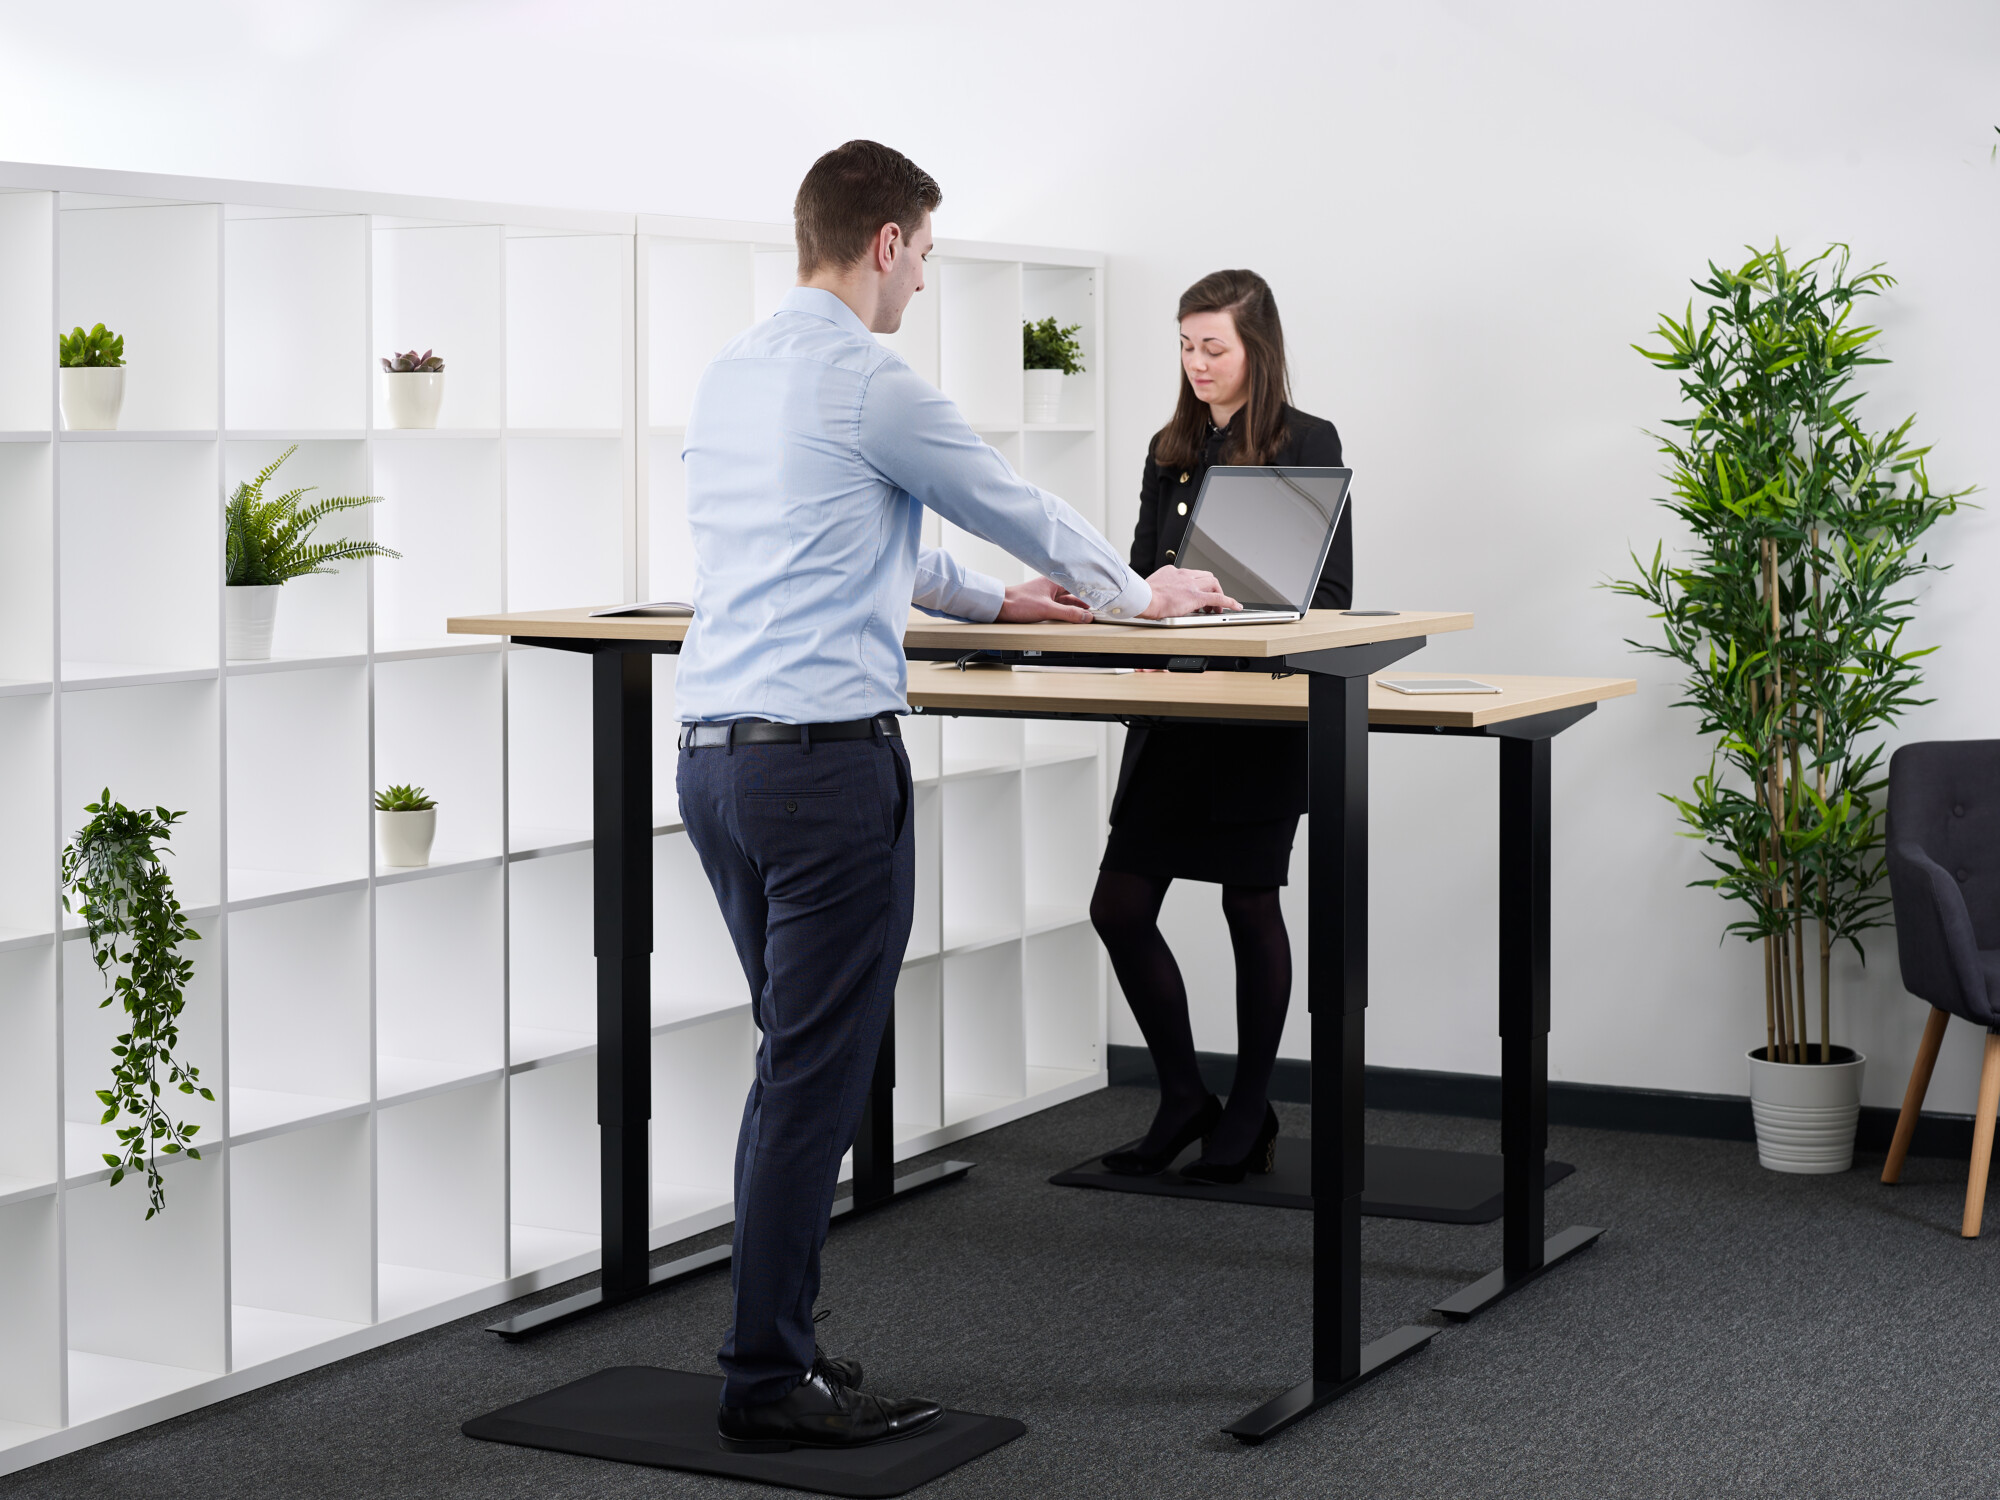 The premium Buro Home White Frame Height Adjustable Desk is available in 6 top finishes, so you can build your dream desk that matches your style.